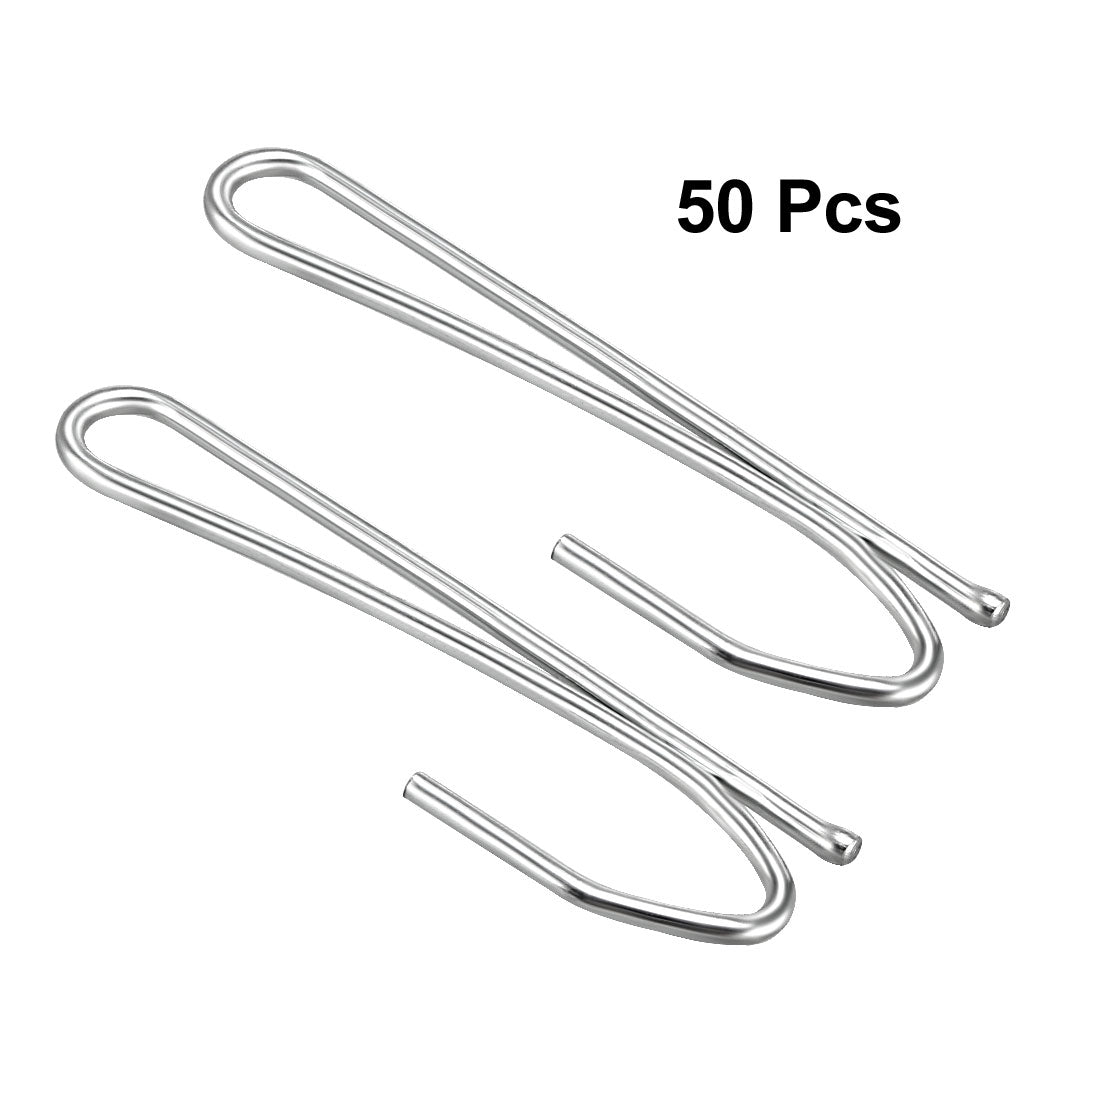 uxcell Uxcell Curtain Hooks Metal Single Prongs Pinch Pleat Drapery Hook for Drapes Tapes Silver Tone 50 Pcs